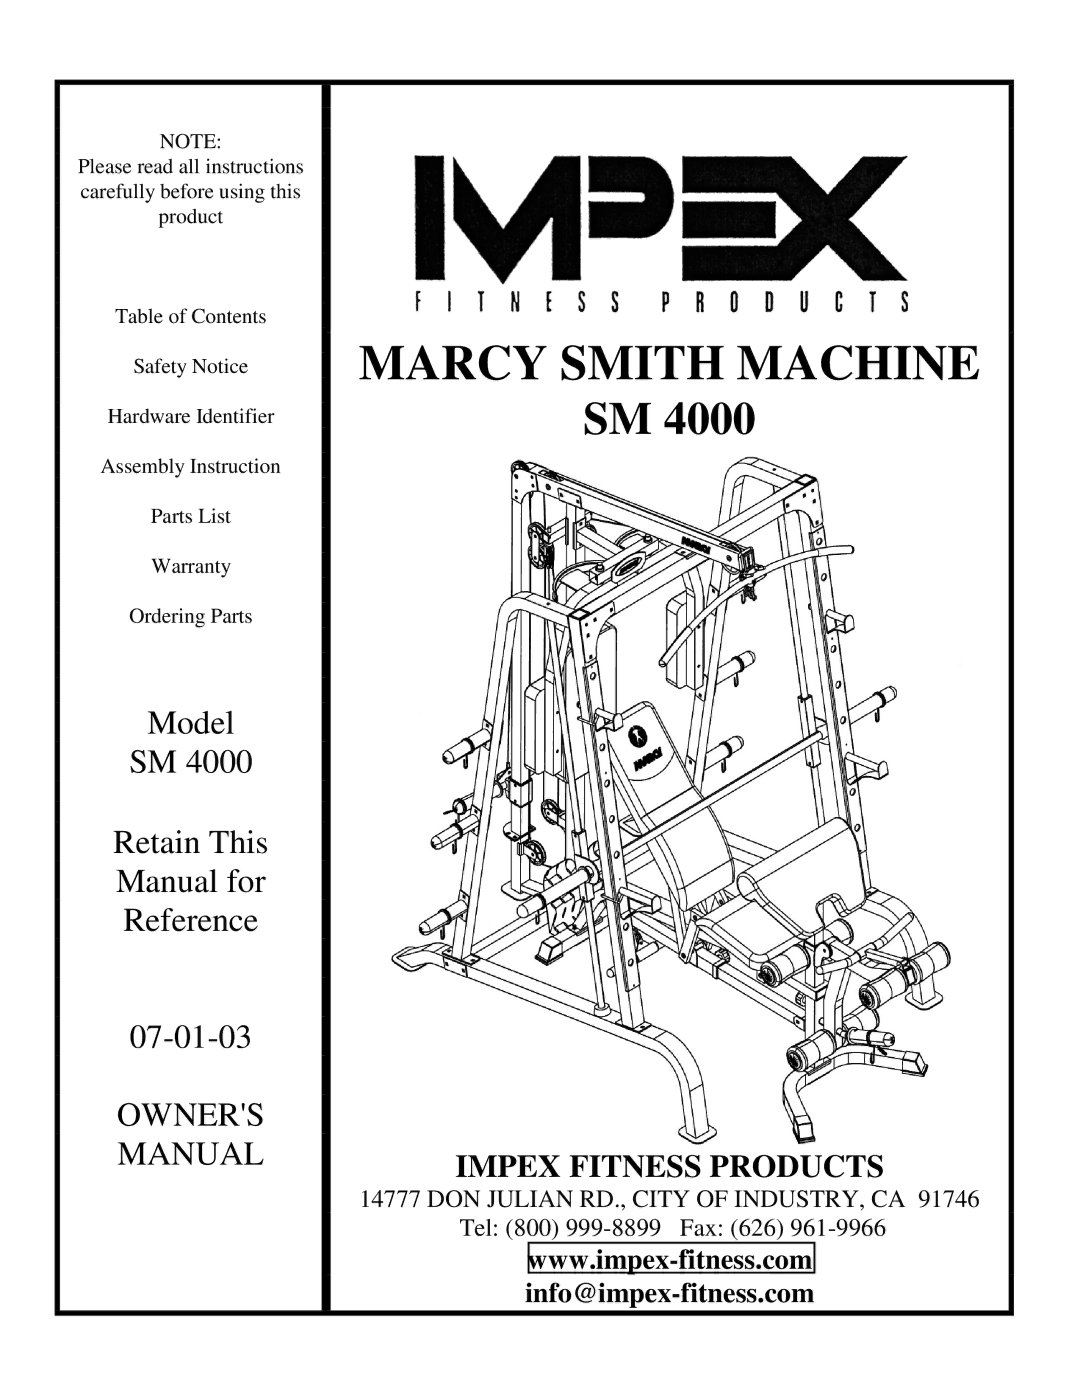 Impex SM 4000 manual Marcy Smith Machine 